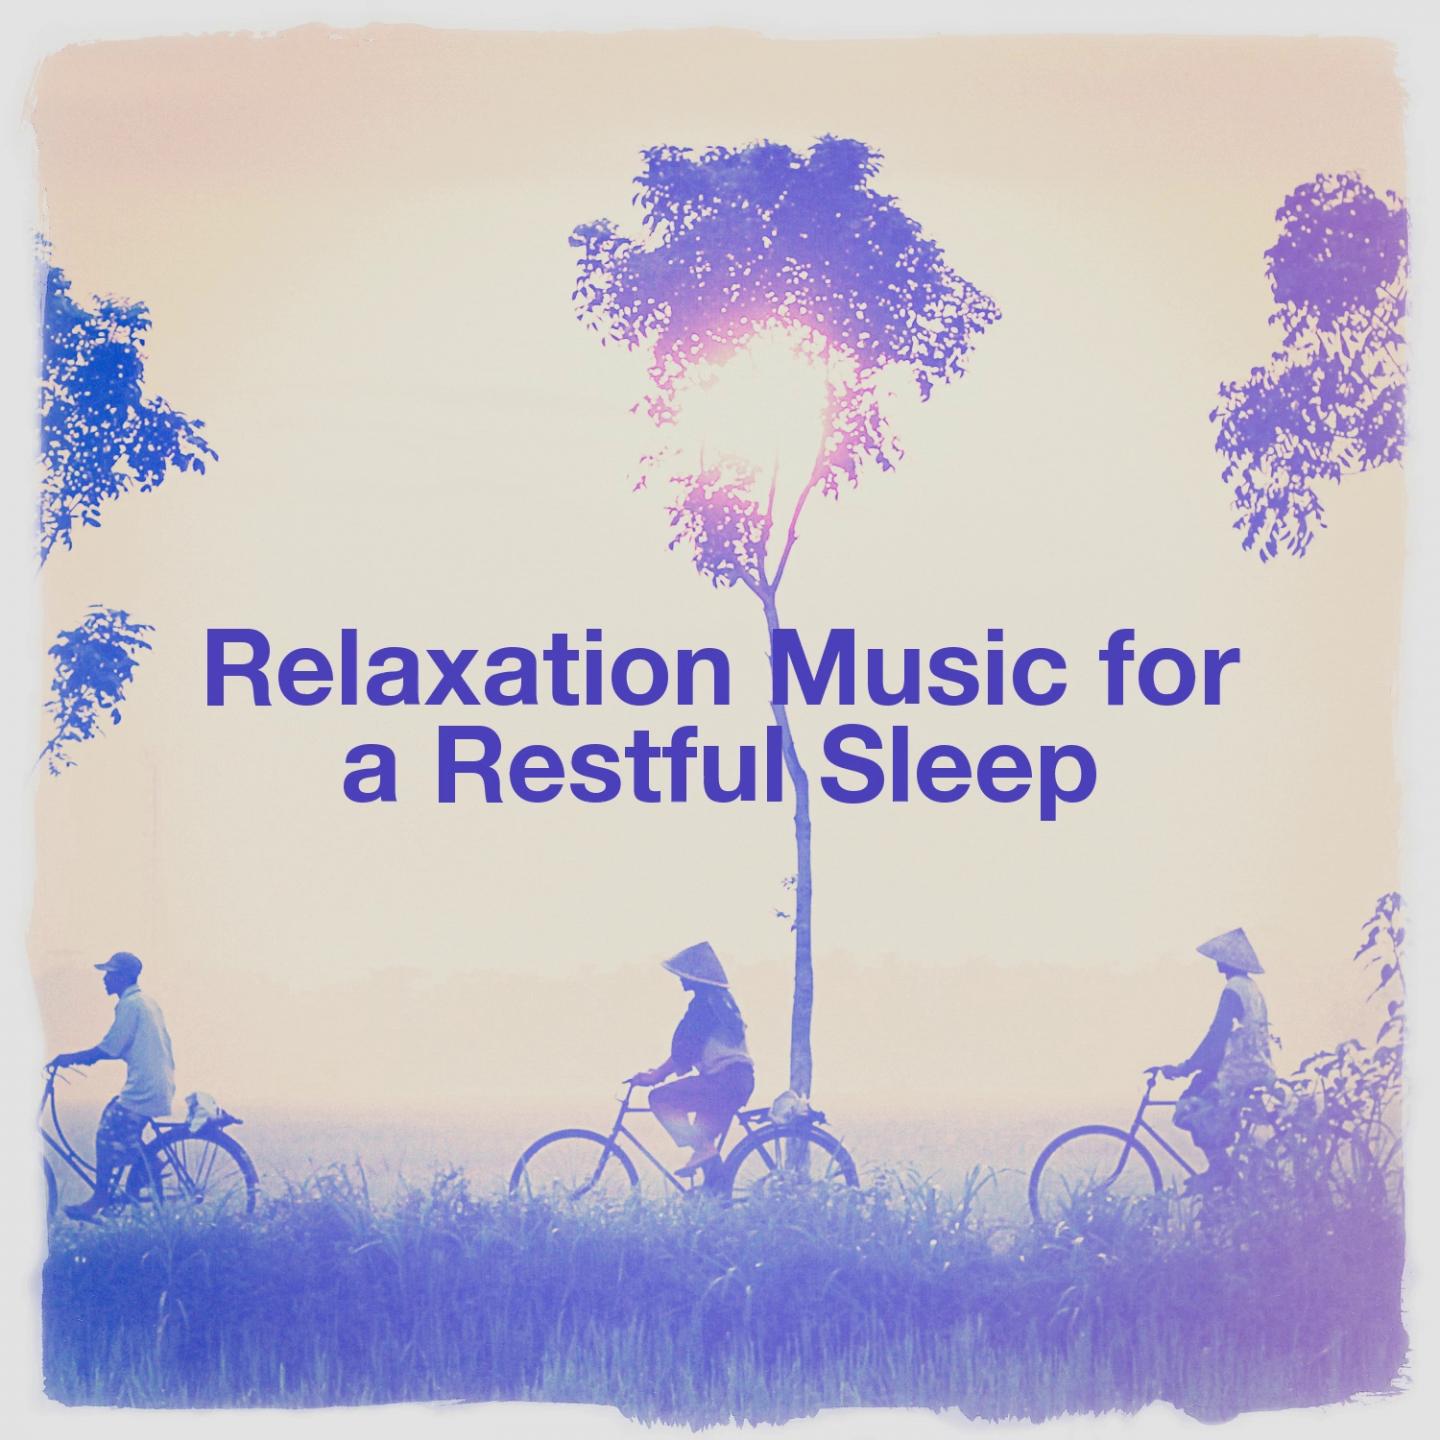 Relaxation music for a restful sleep